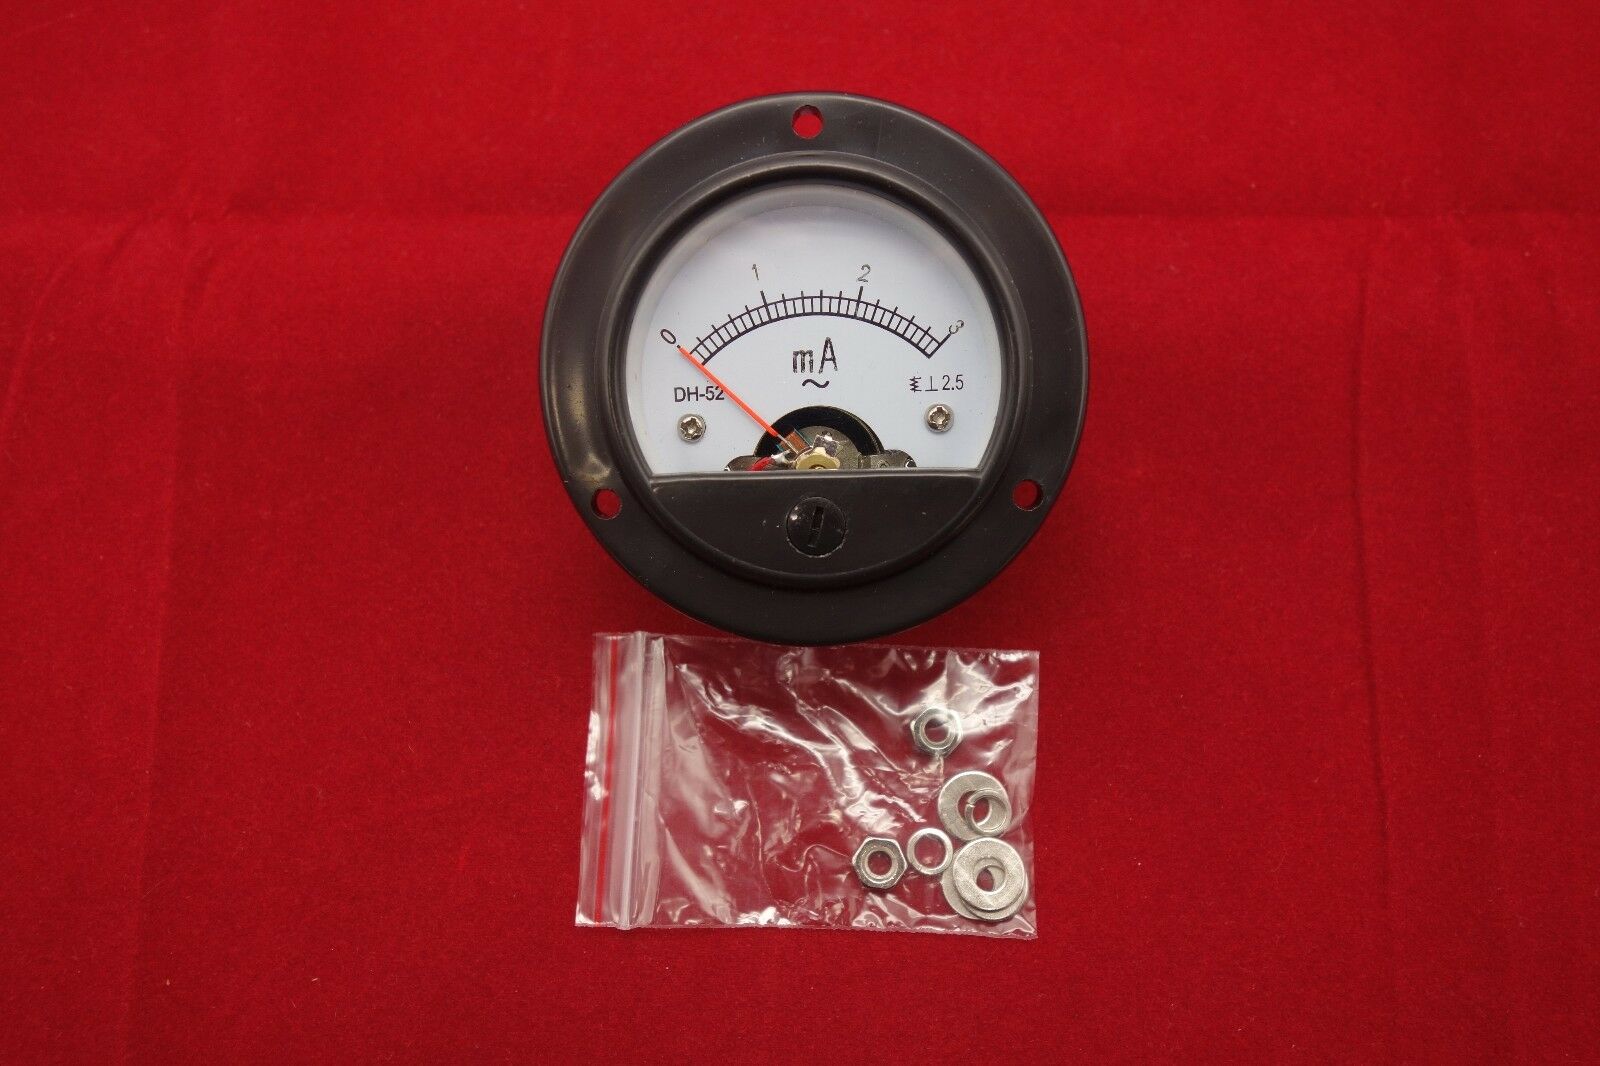 1pc AC 0-3MA Round Analog Ammeter Panel AMP Current Meter Dia. 66.4mm DH52